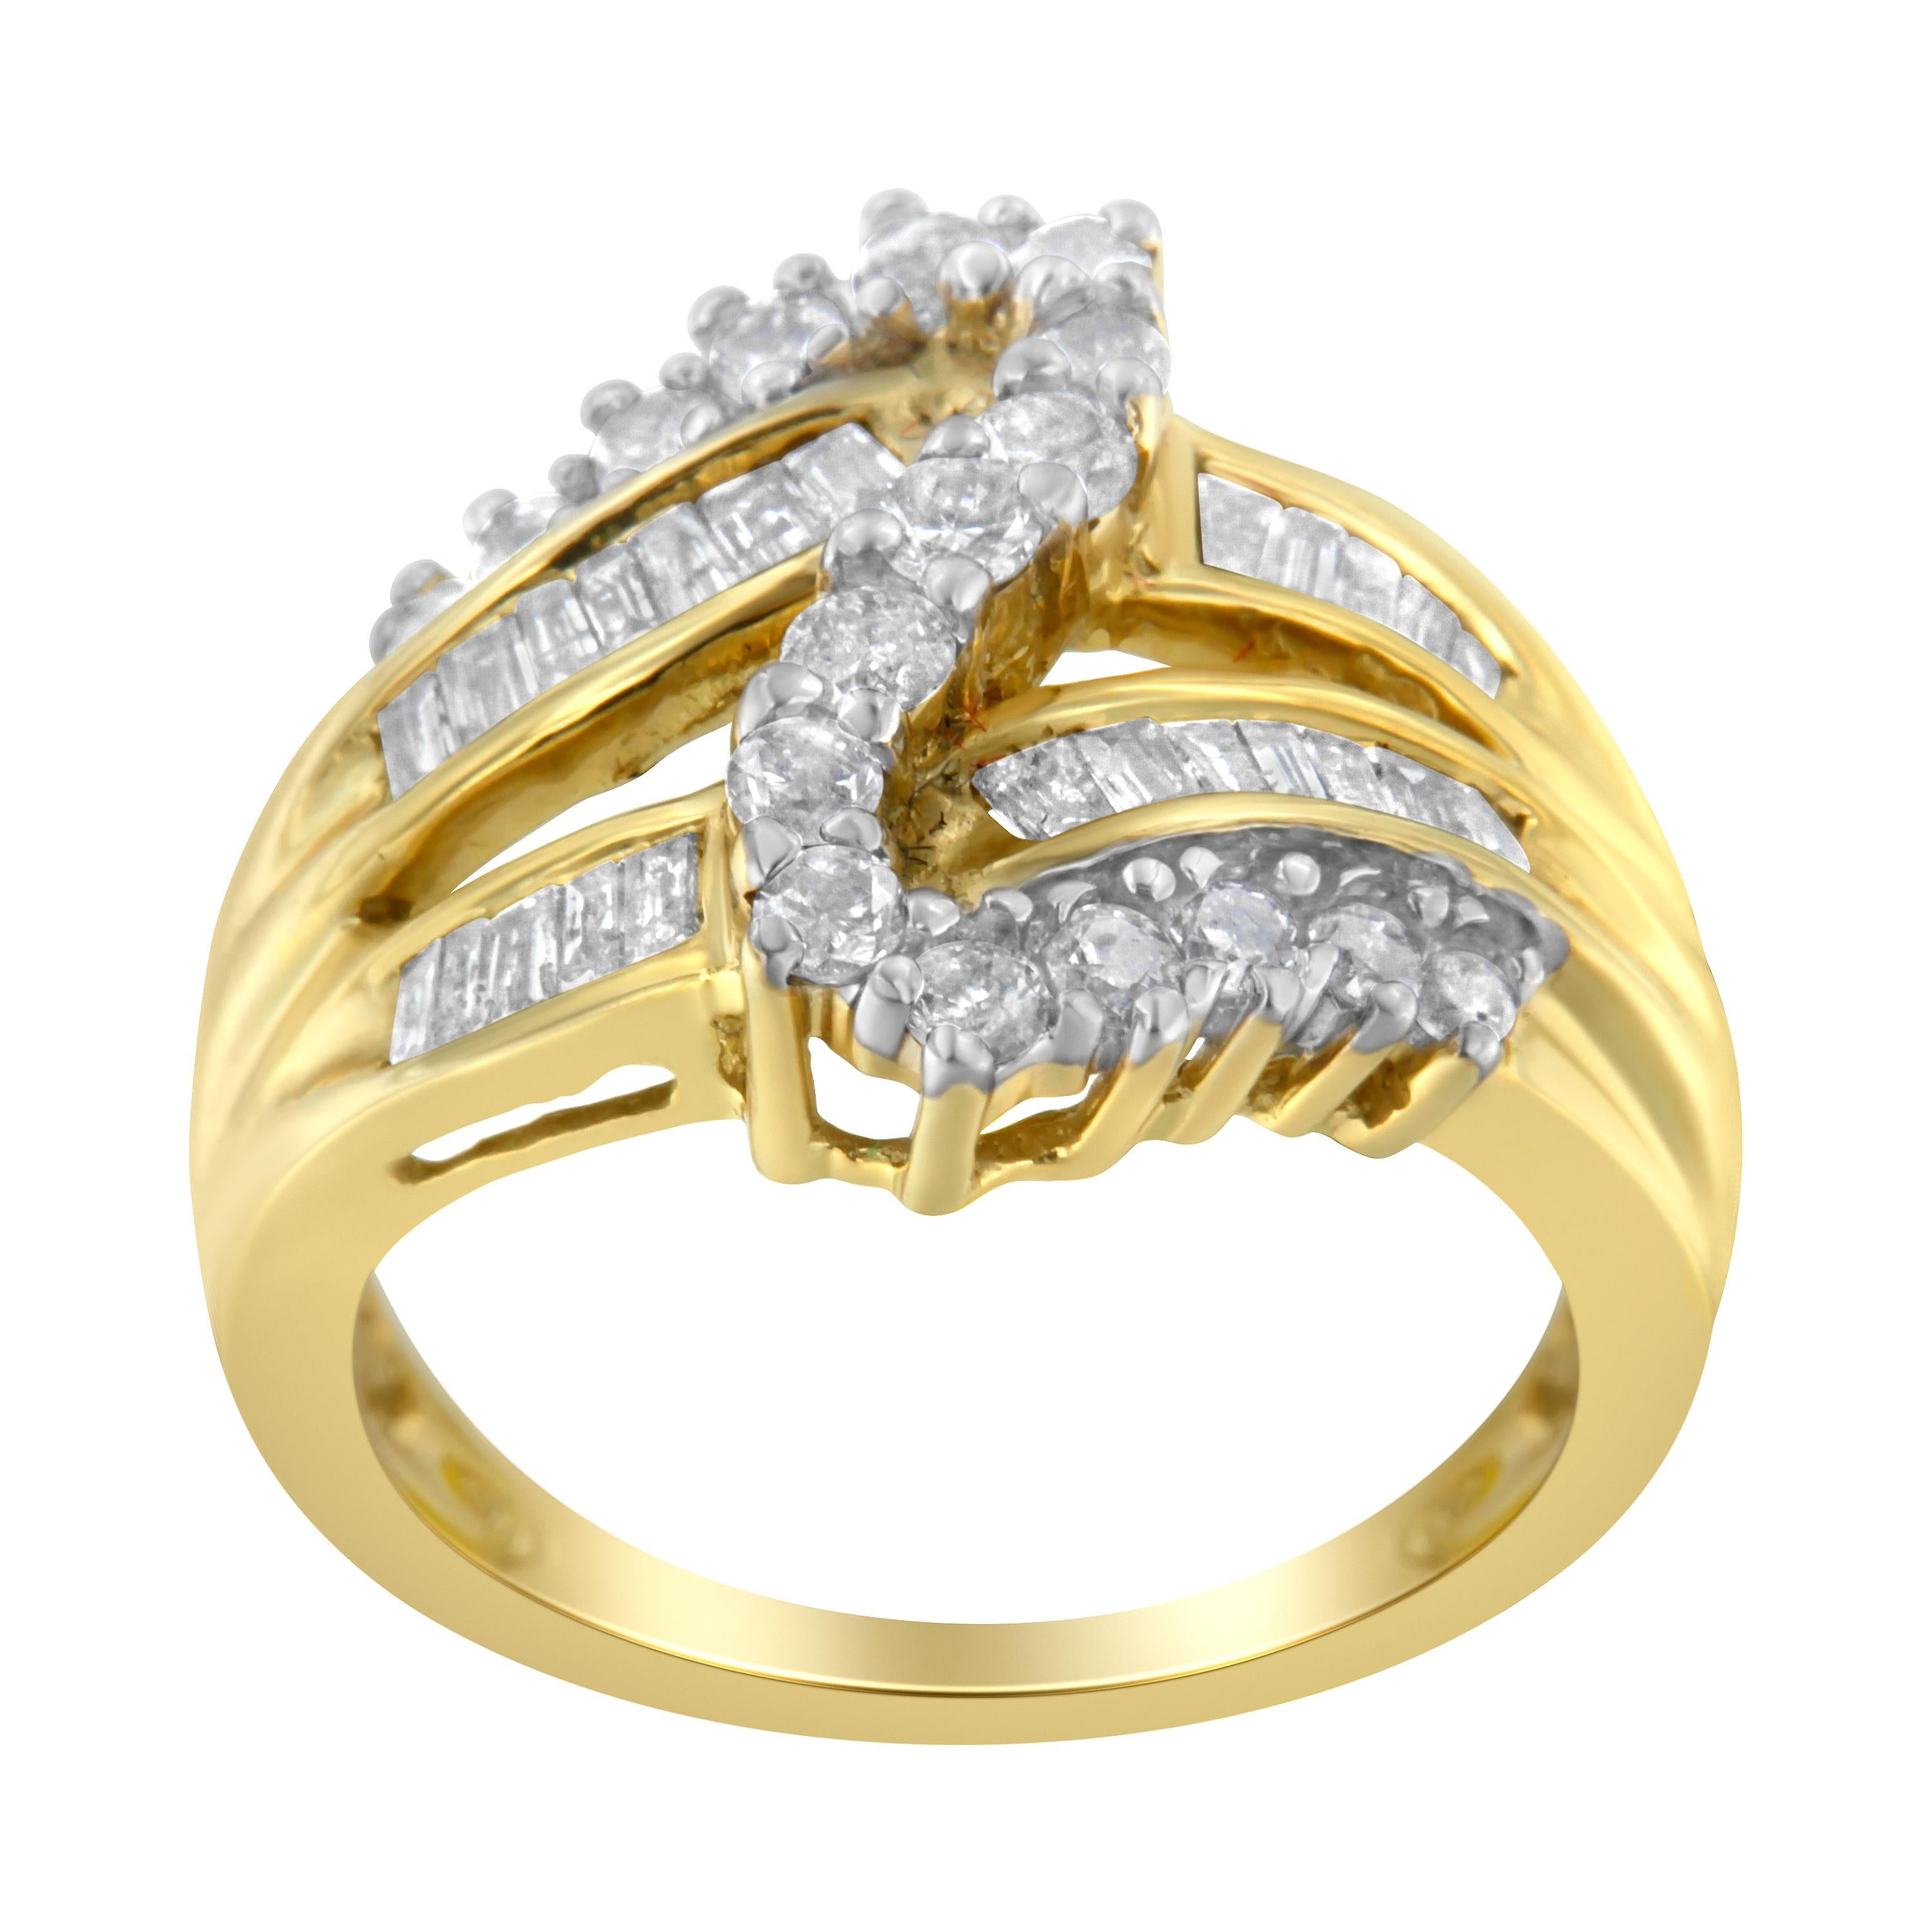 For Sale:  10K Yellow Gold 1.0 Carat Round and Baguette Cut Diamond Bypass Ring 3